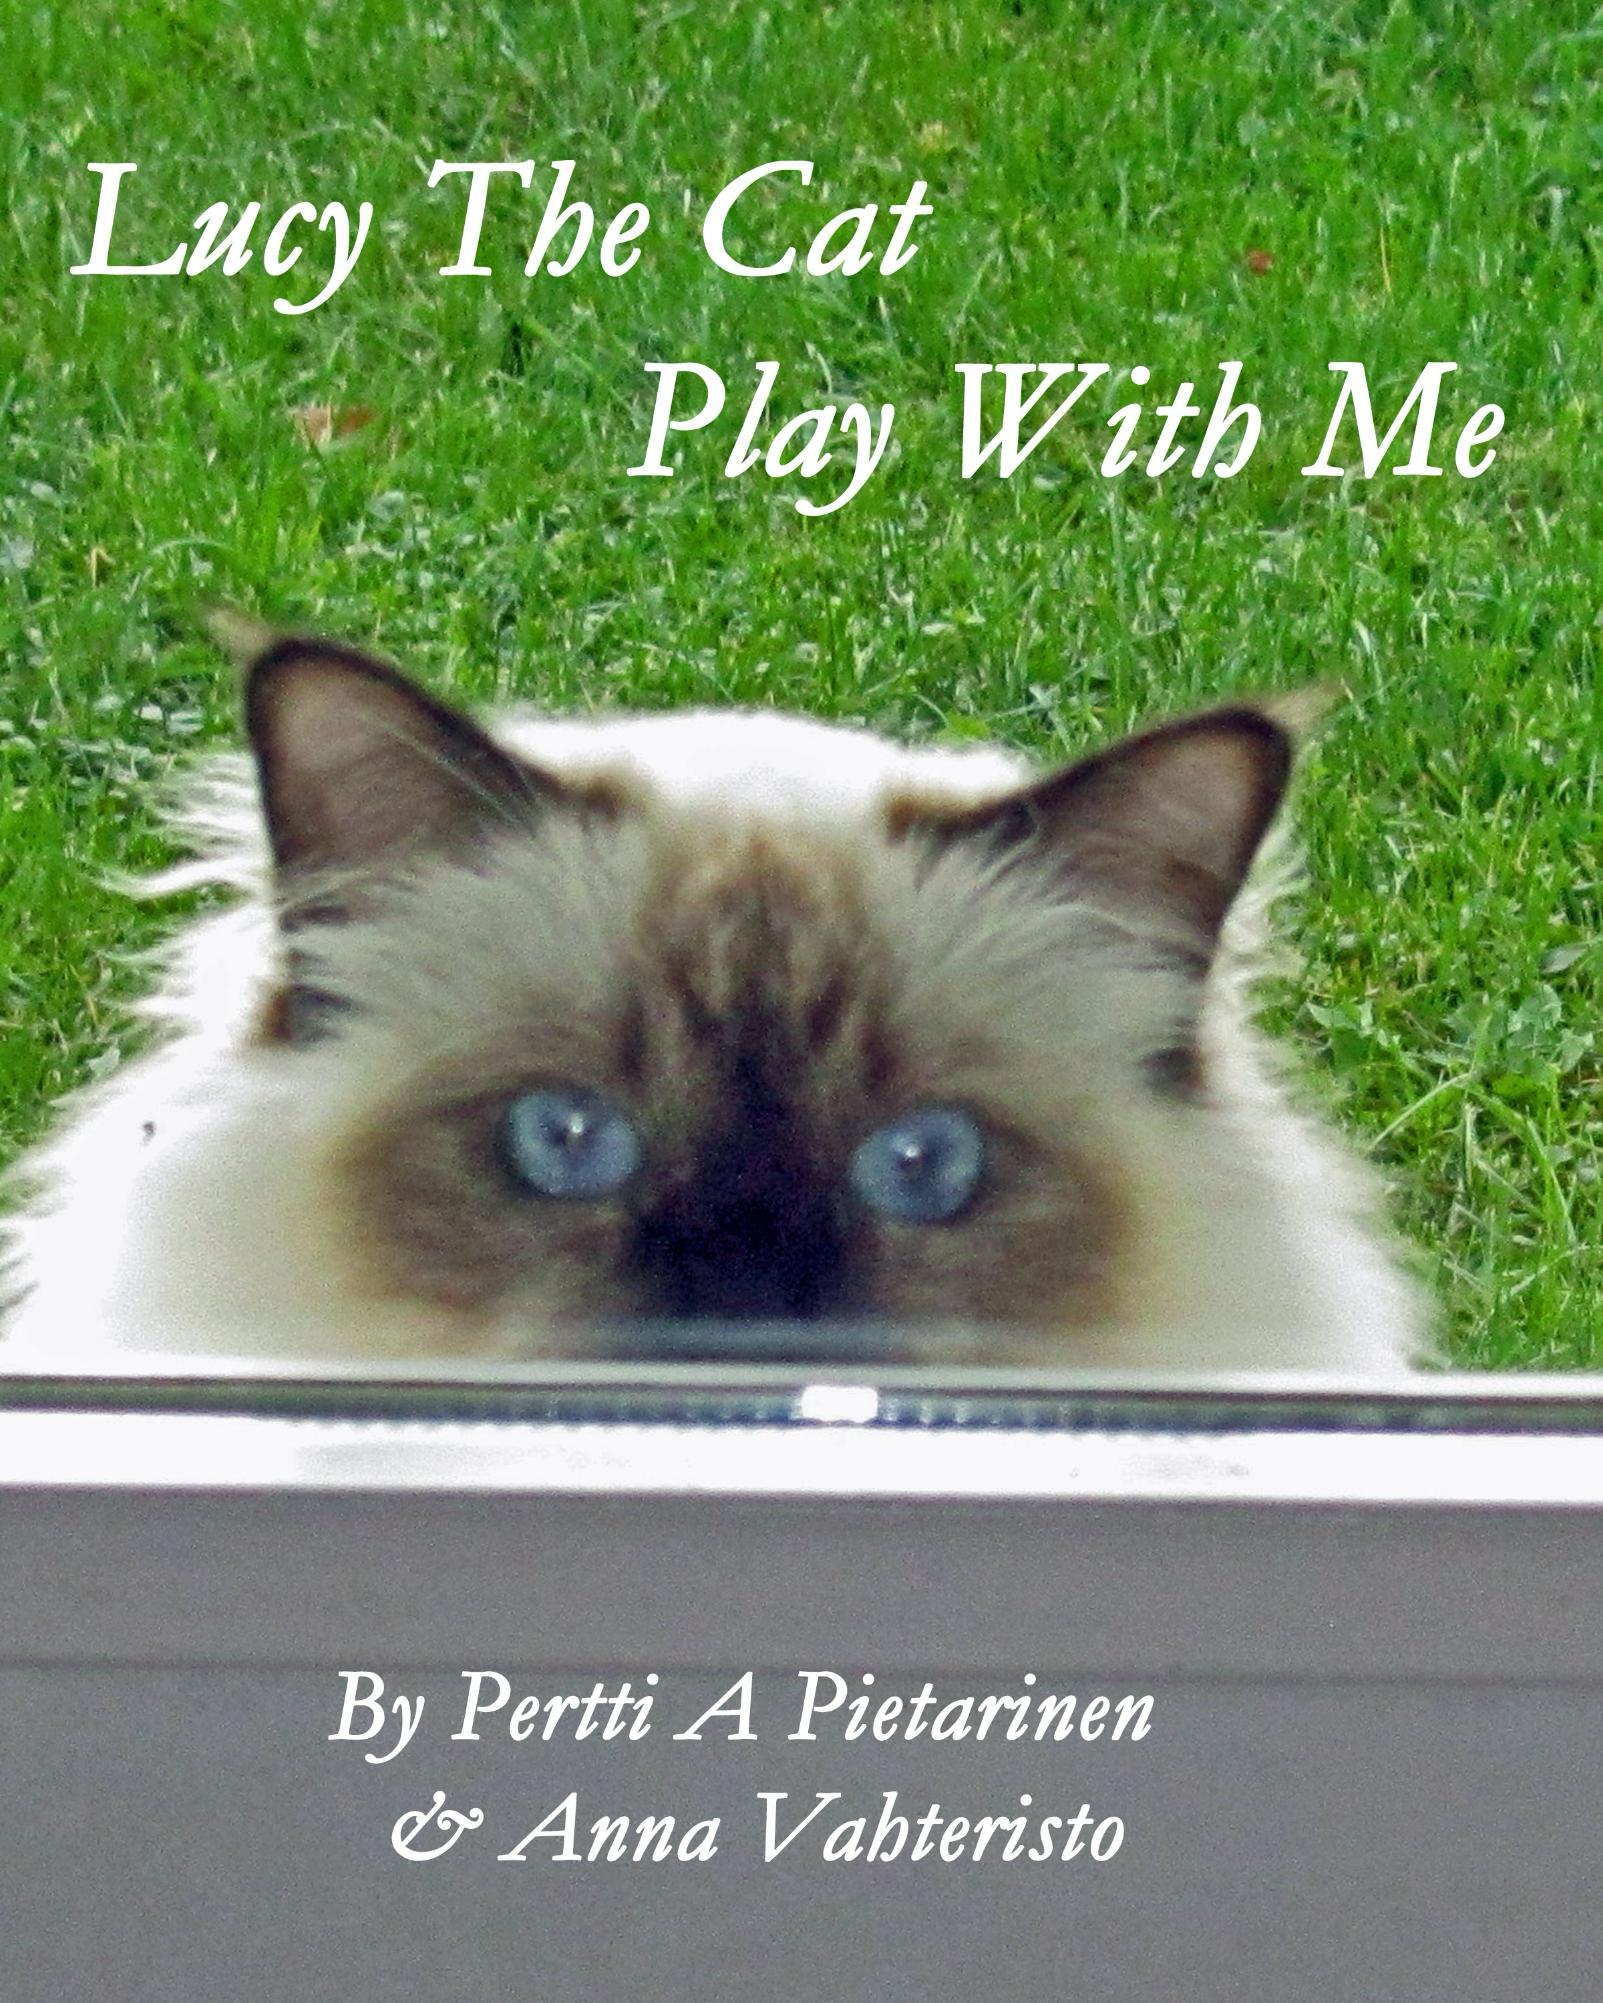 FREE: Lucy The Cat Play With Me by Pertti A Pietarinen